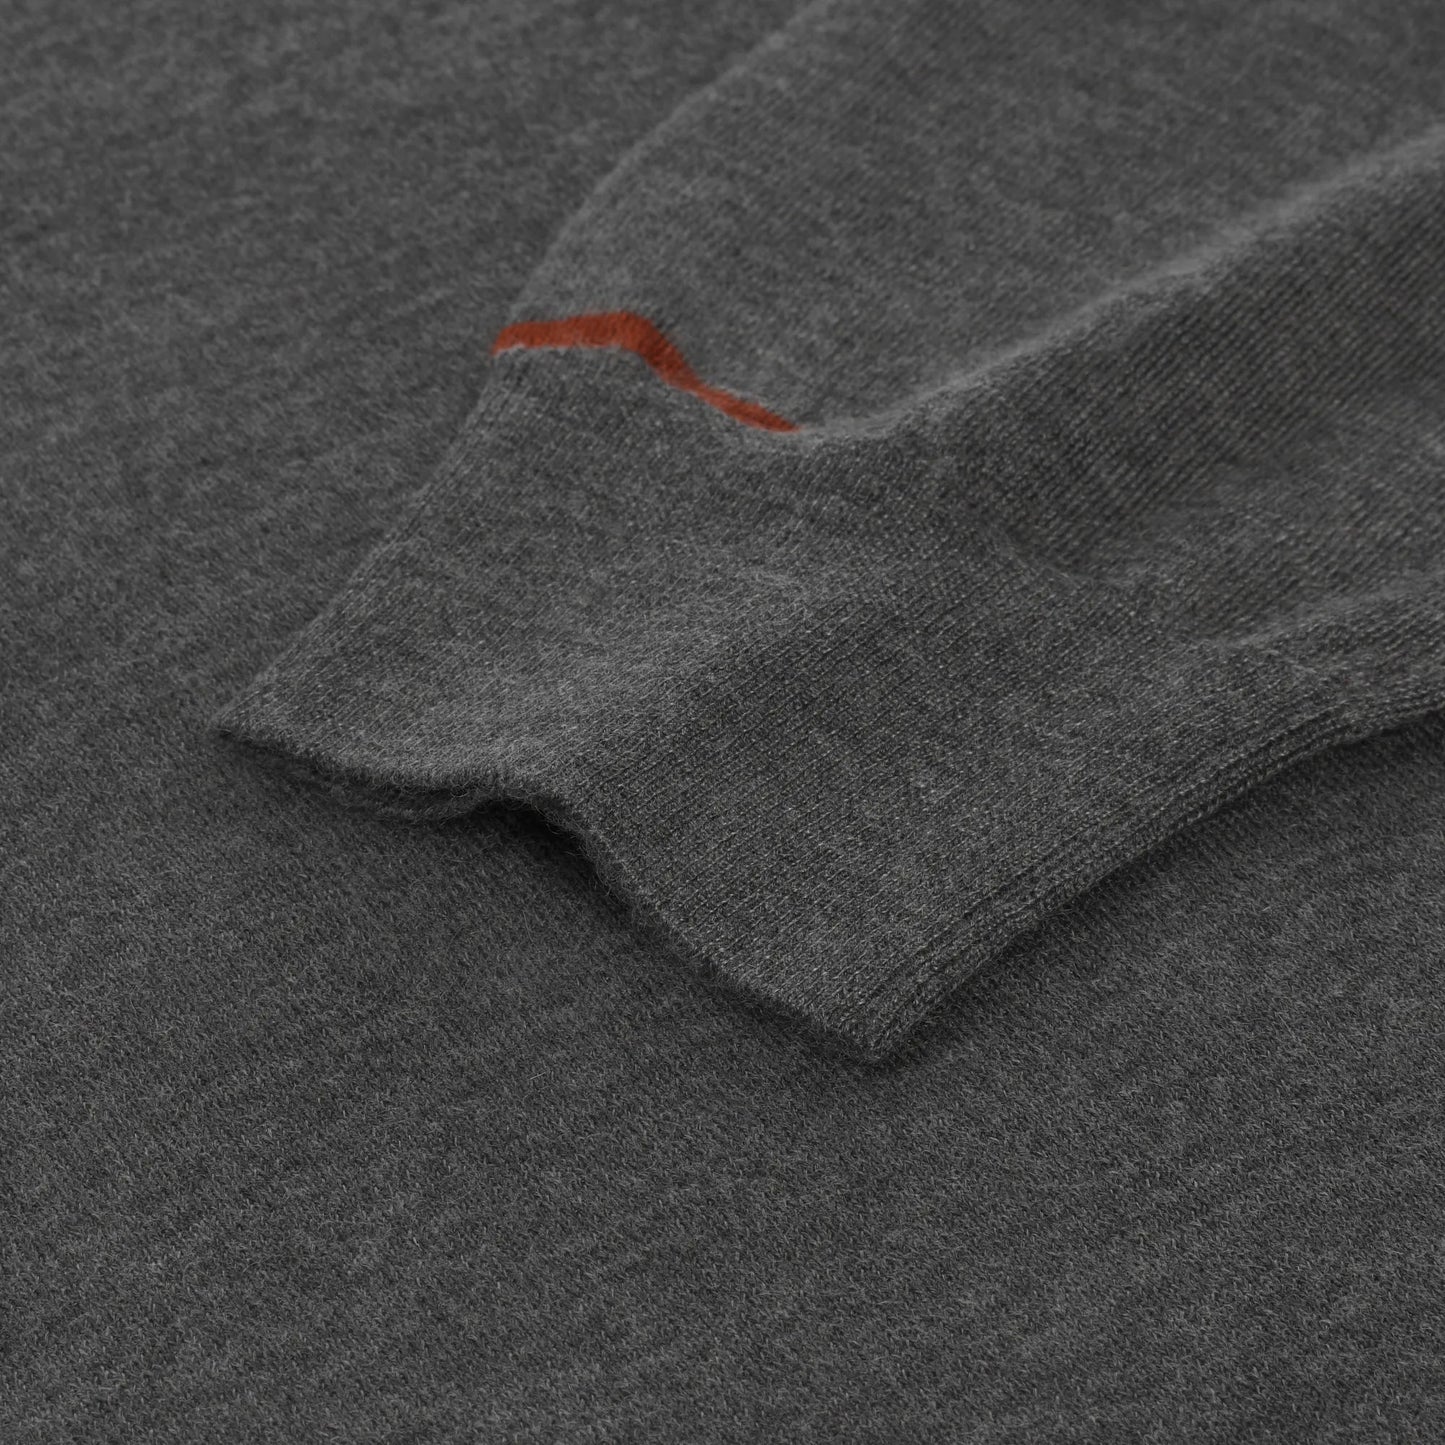 Cruciani Cashmere Blend Sweater in Grey with Red Details - SARTALE